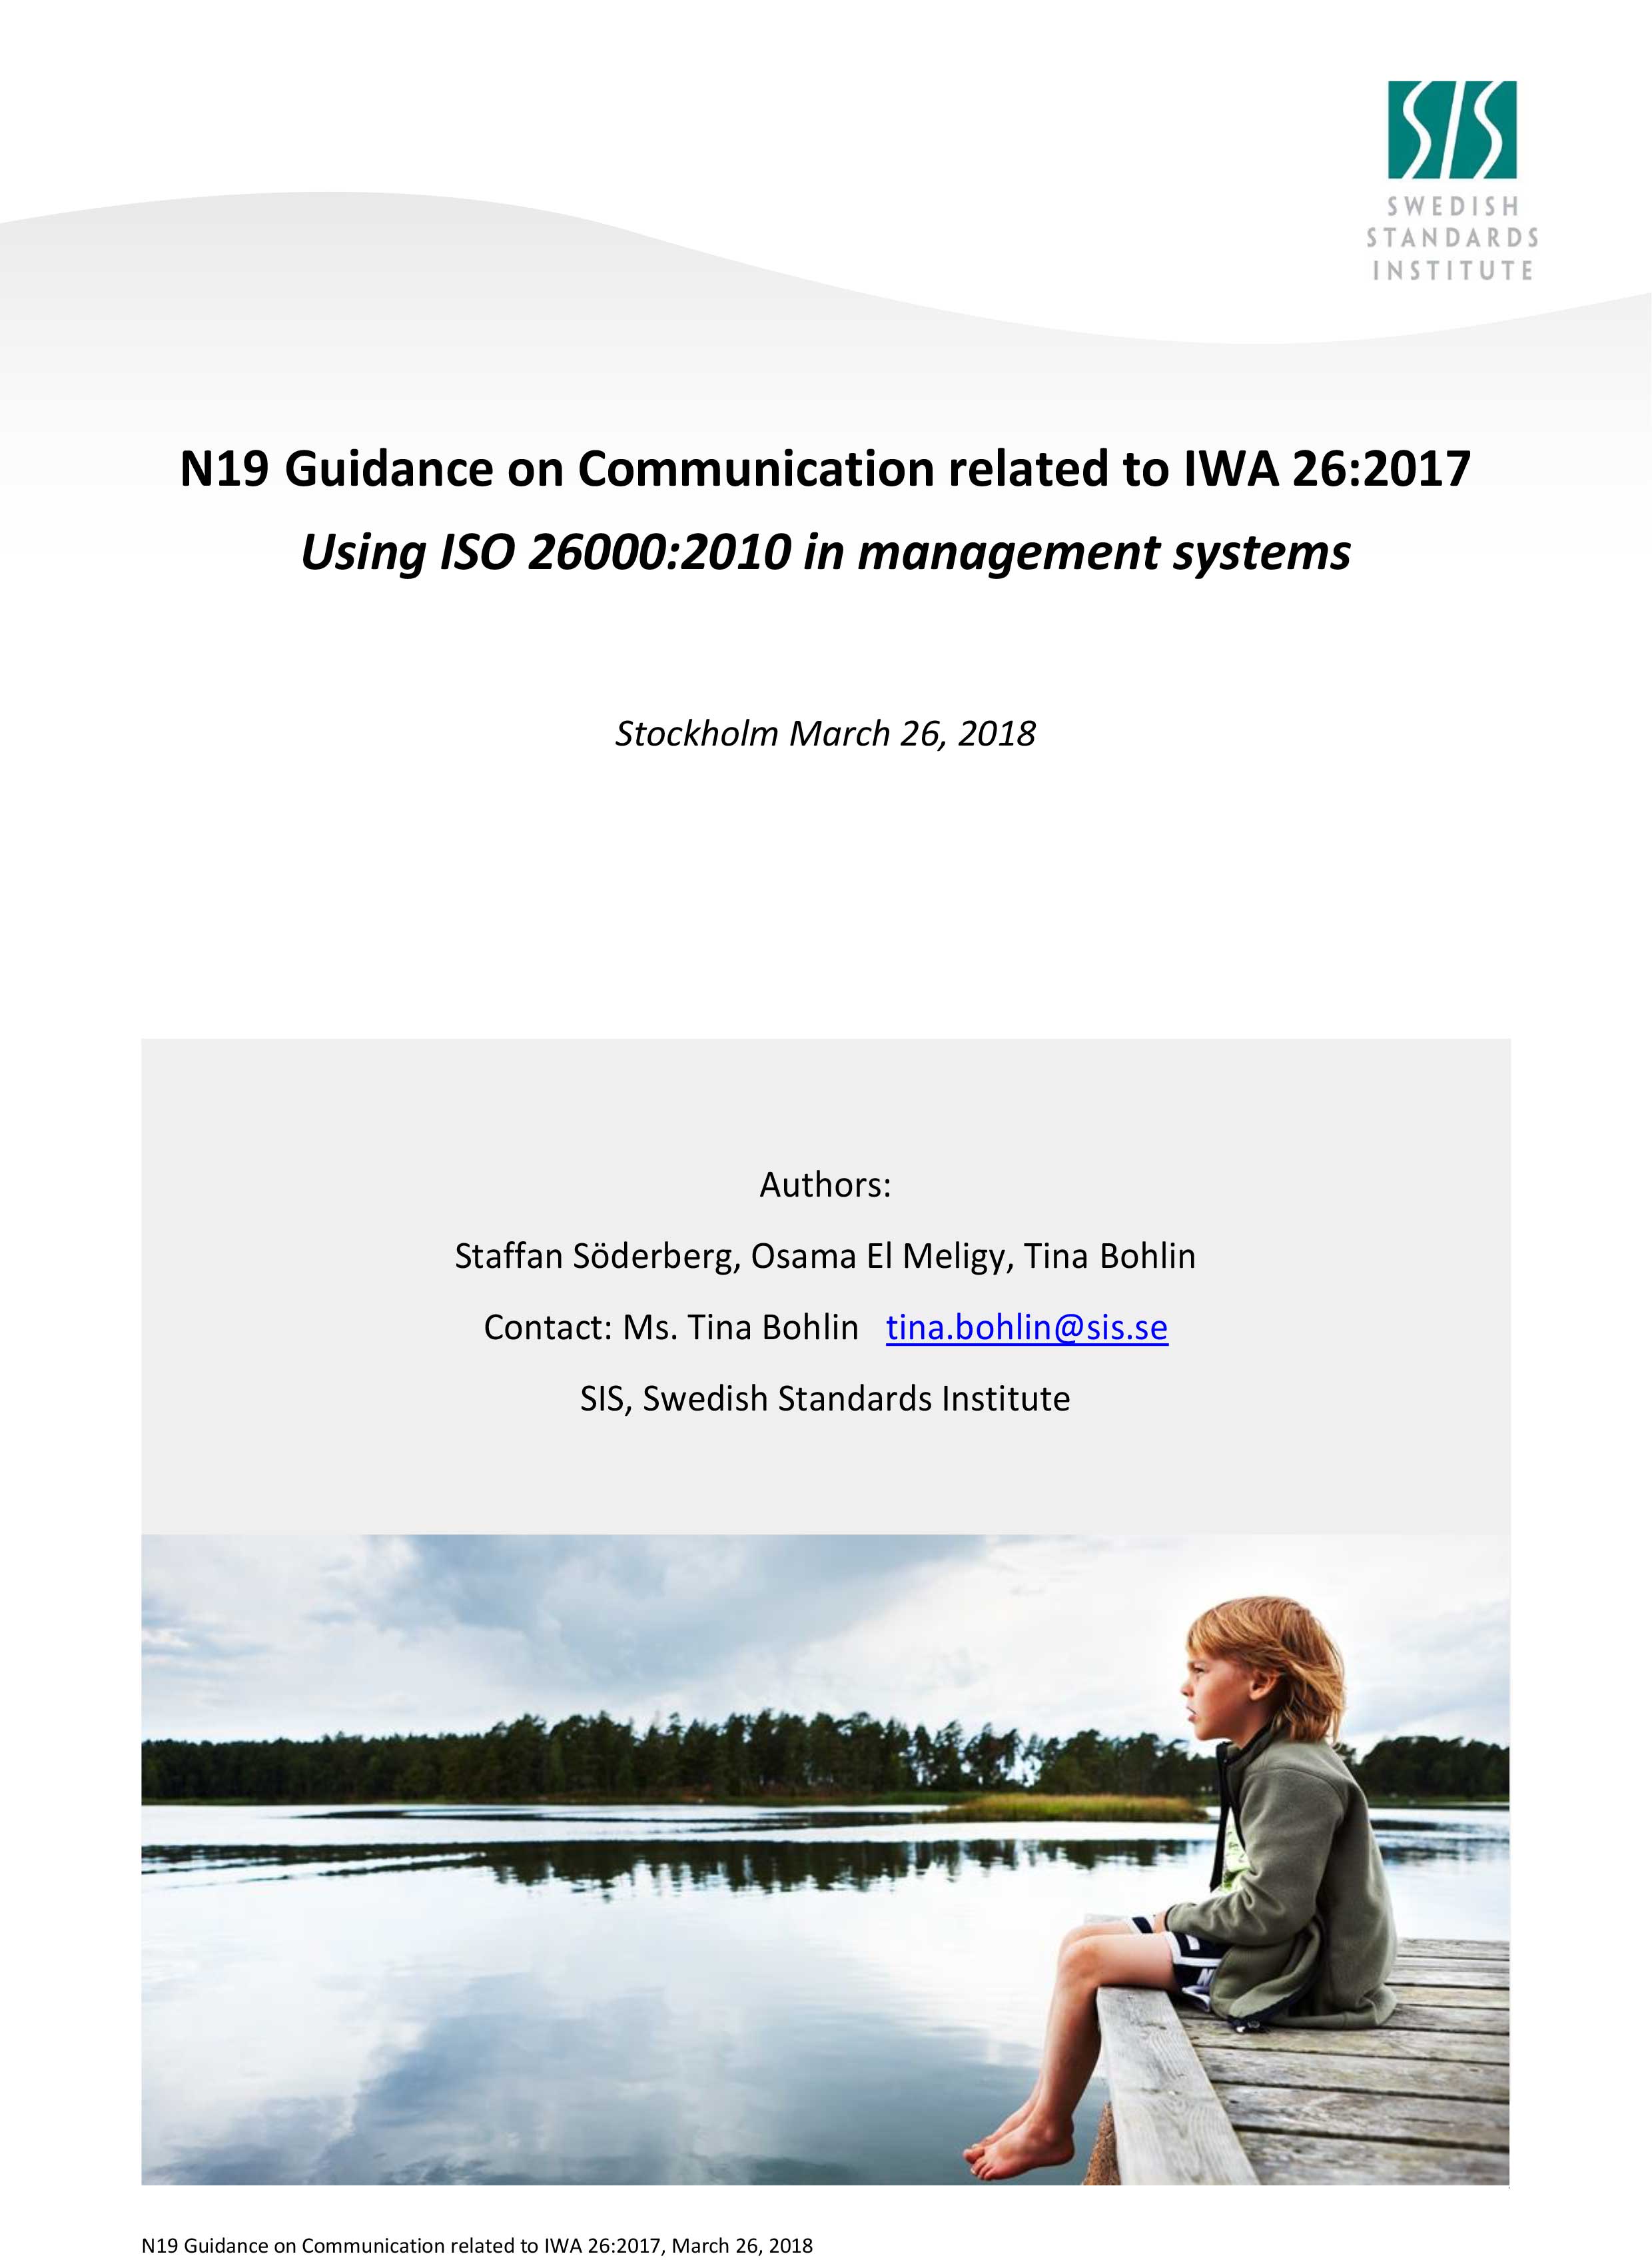 N19 Guidance on Communication related to IWA 26